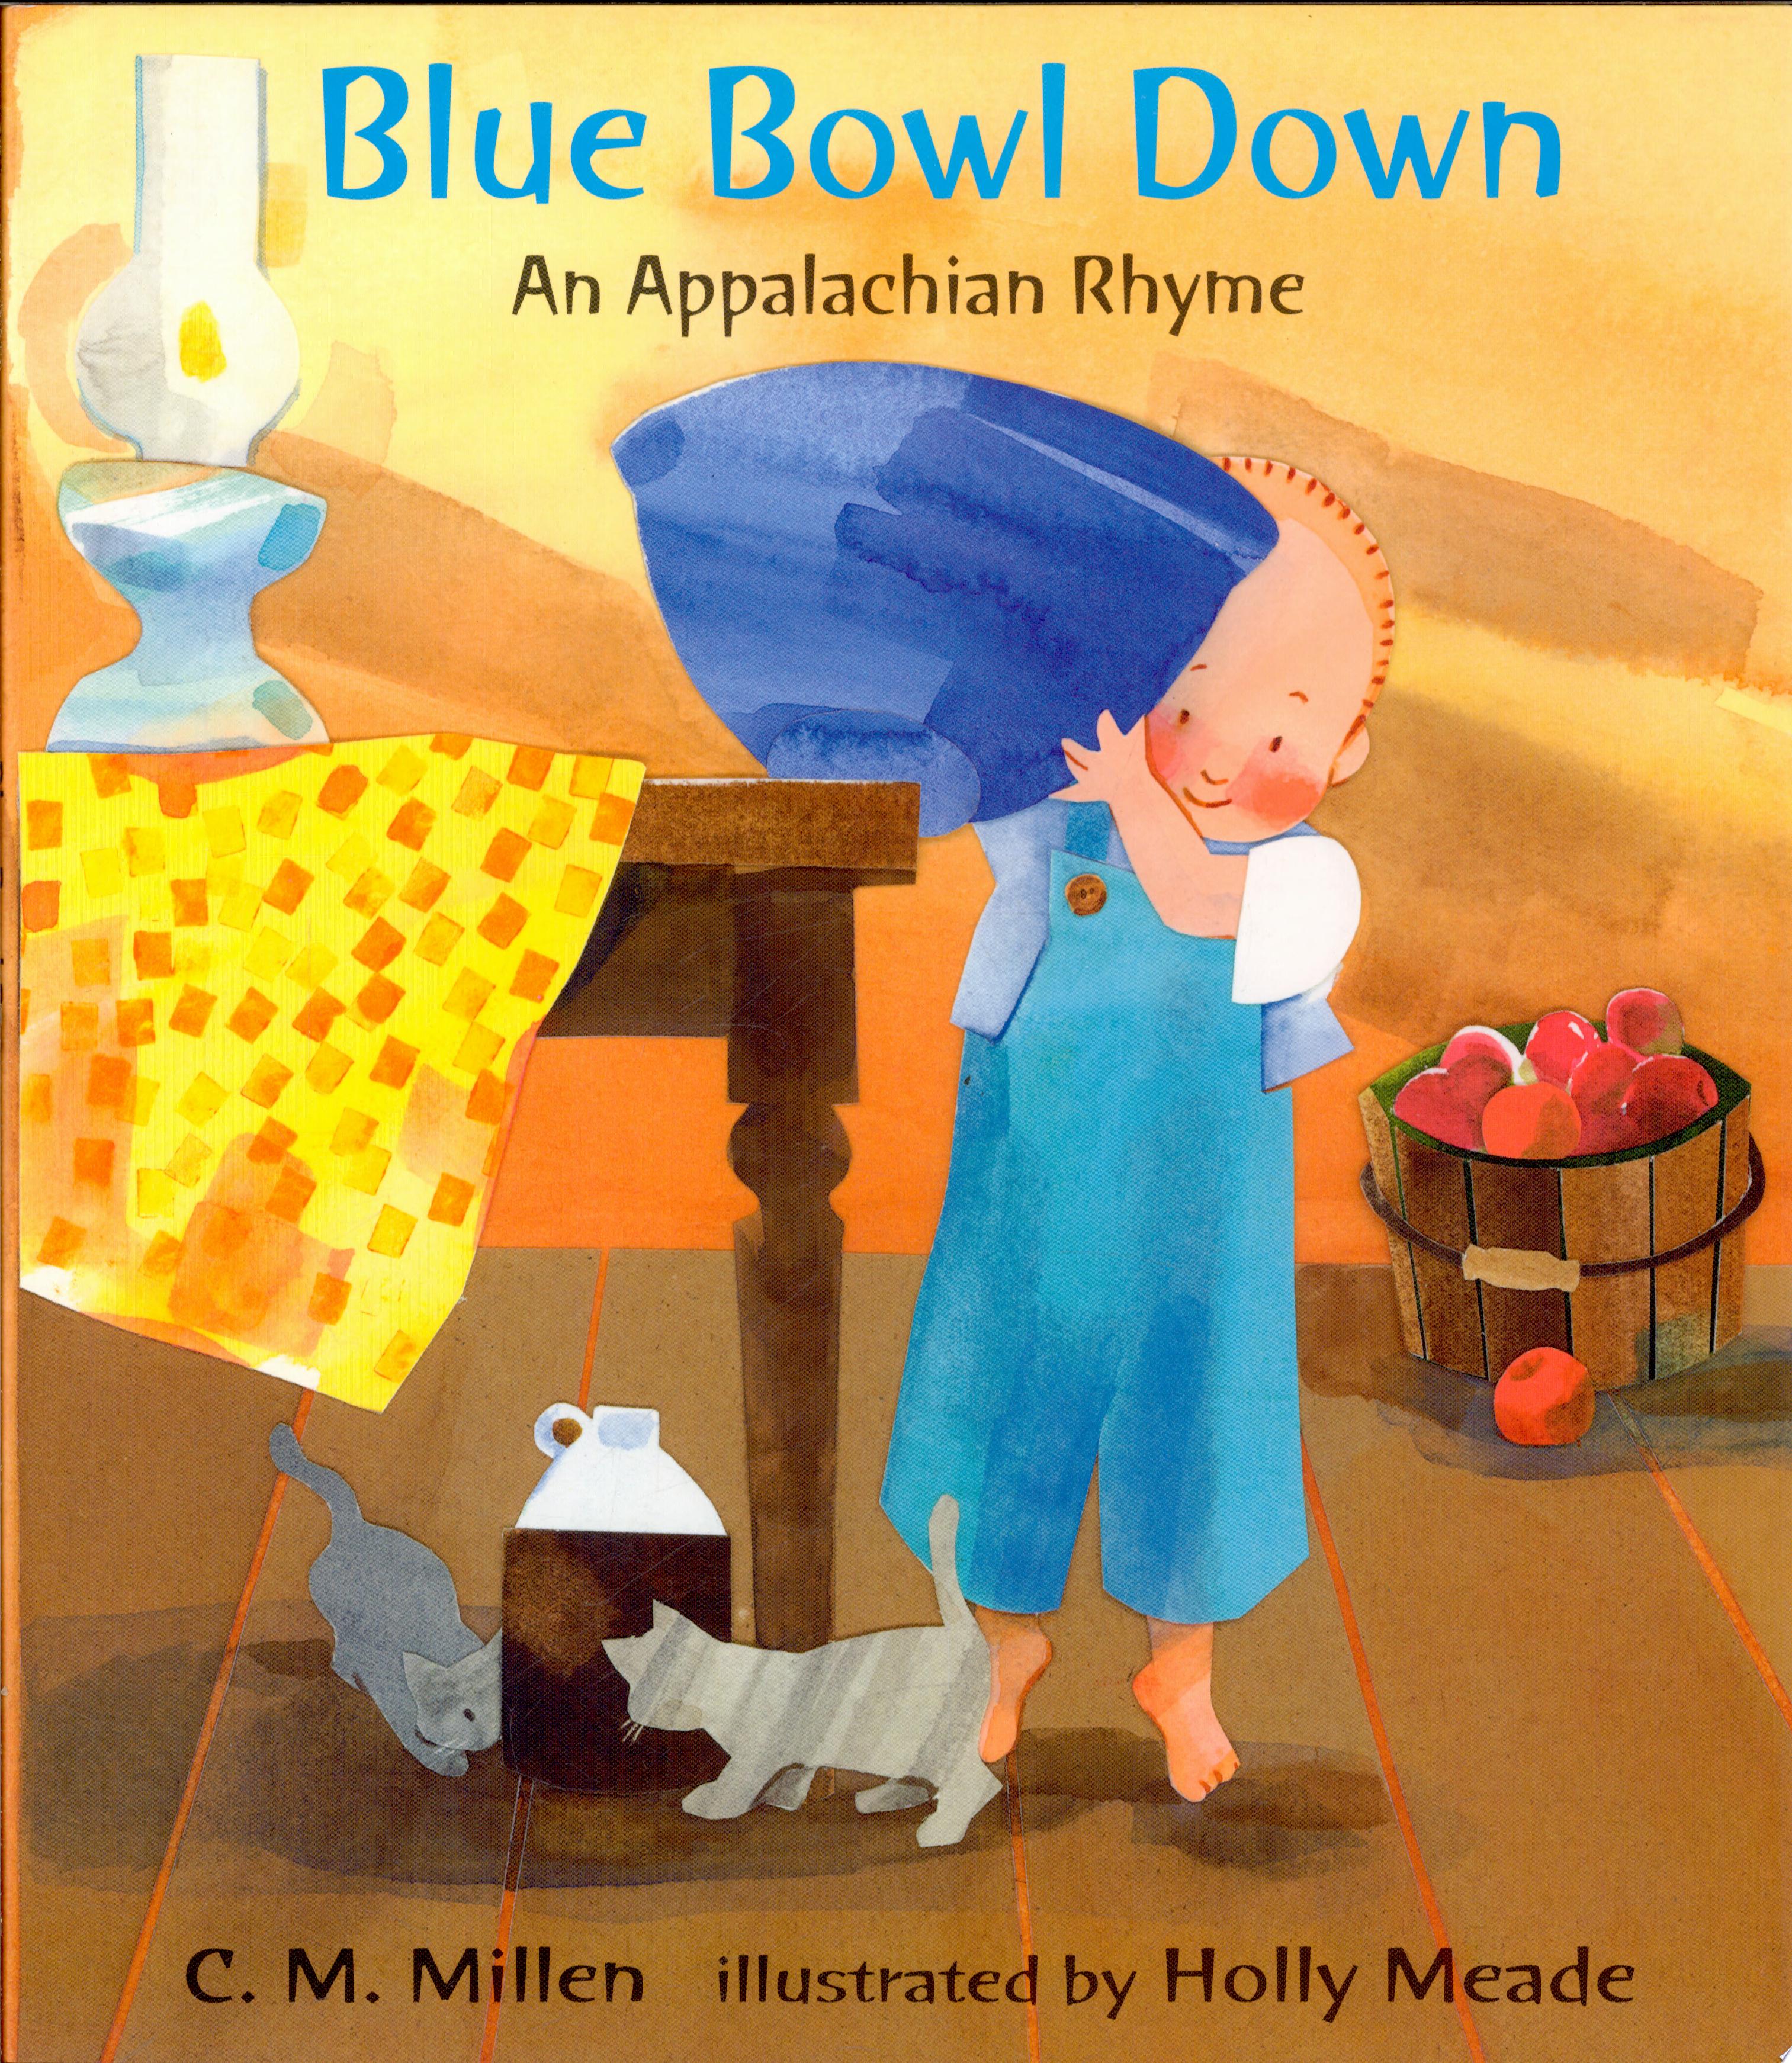 Image for "Blue Bowl Down"